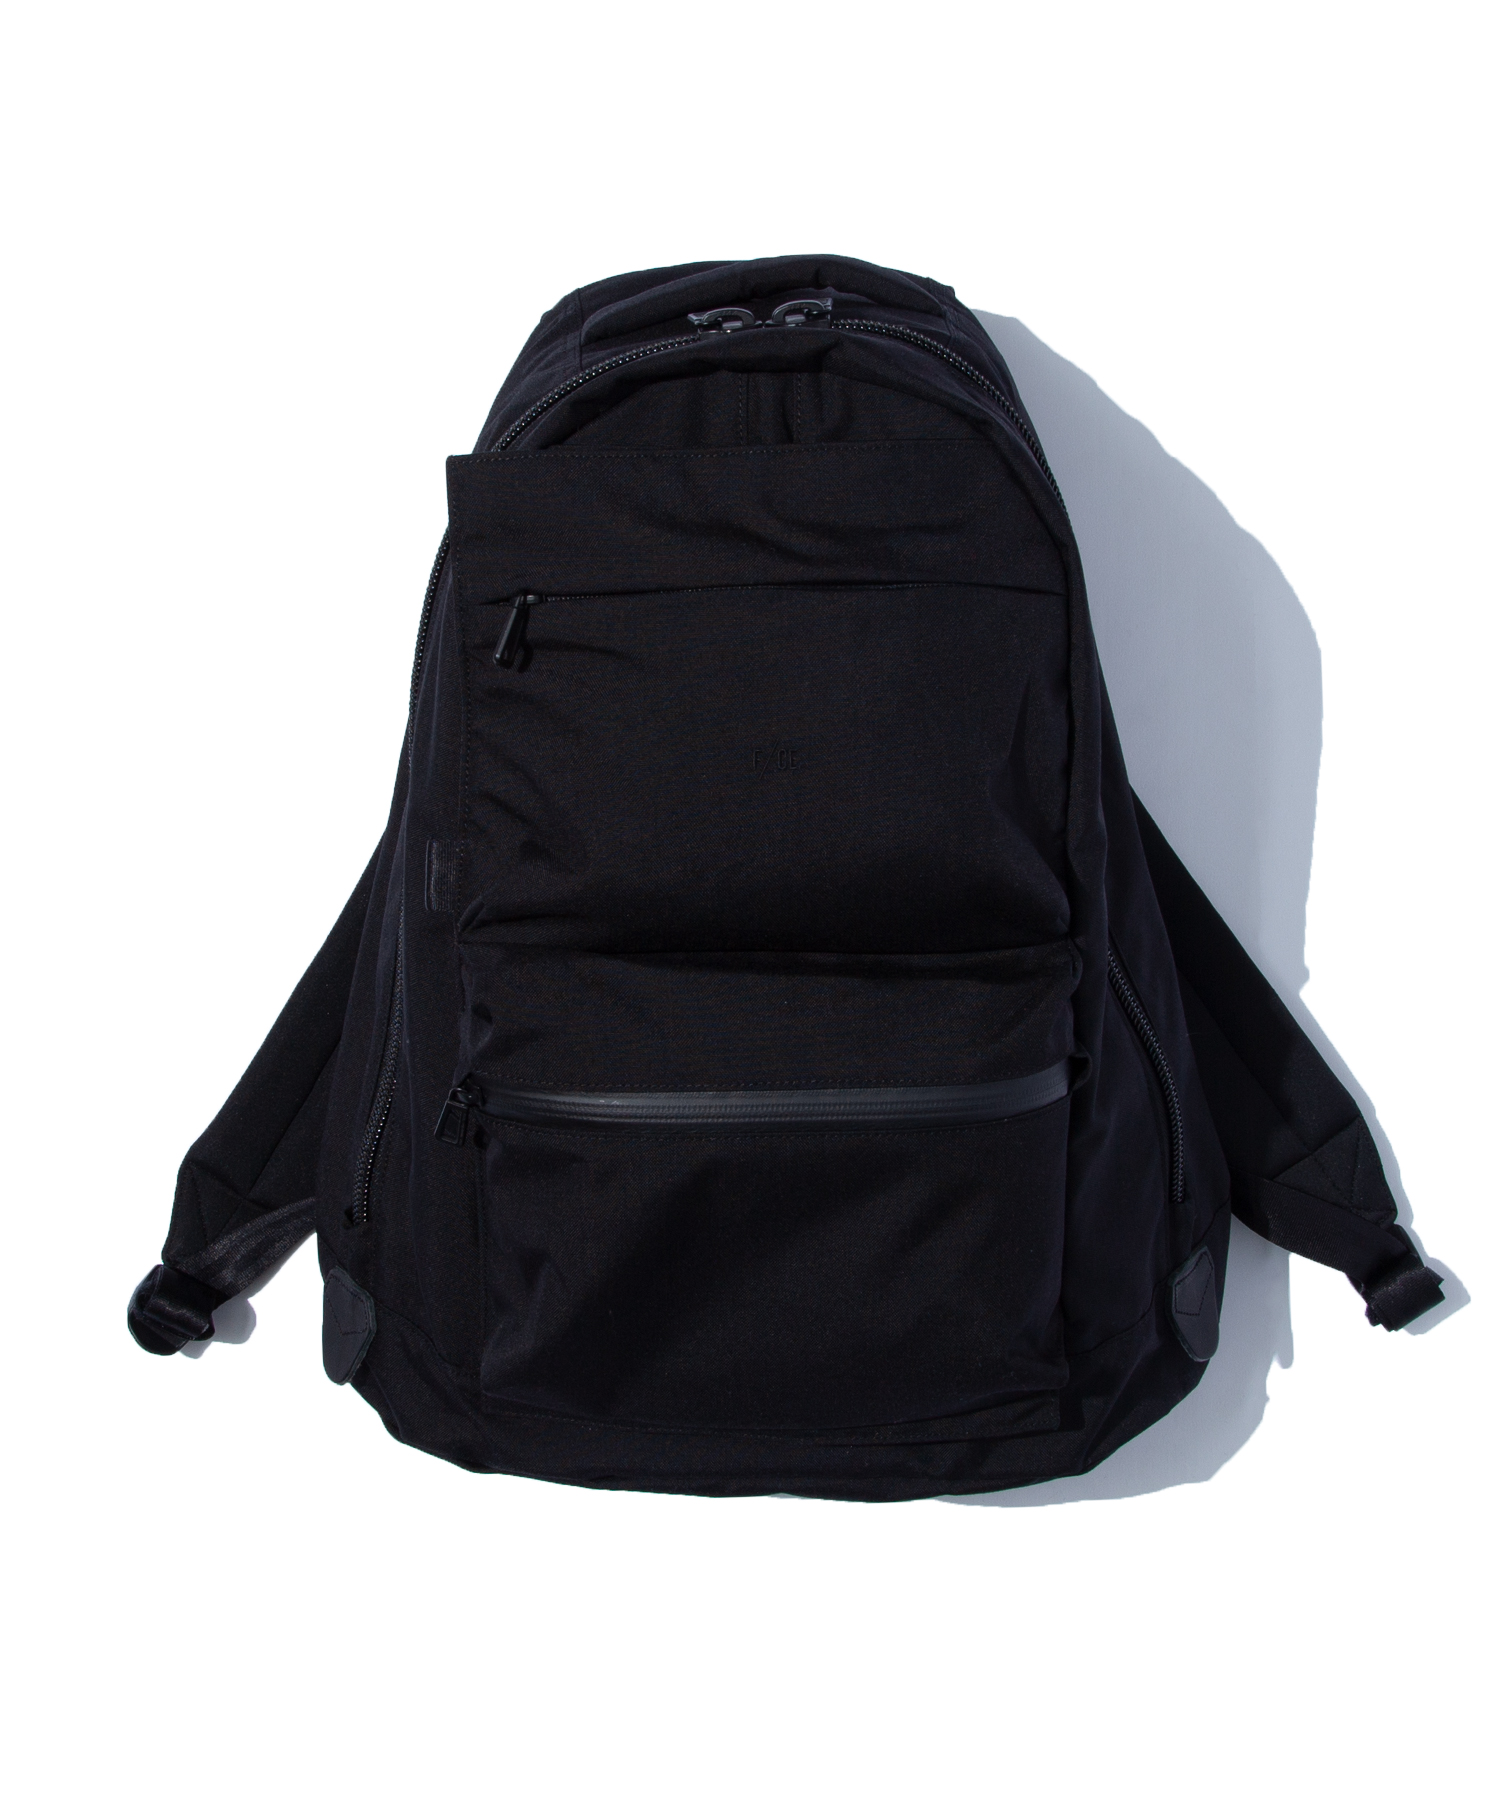 BACKPACK / BAG / ITEMS / F/CE ONLINE STORE